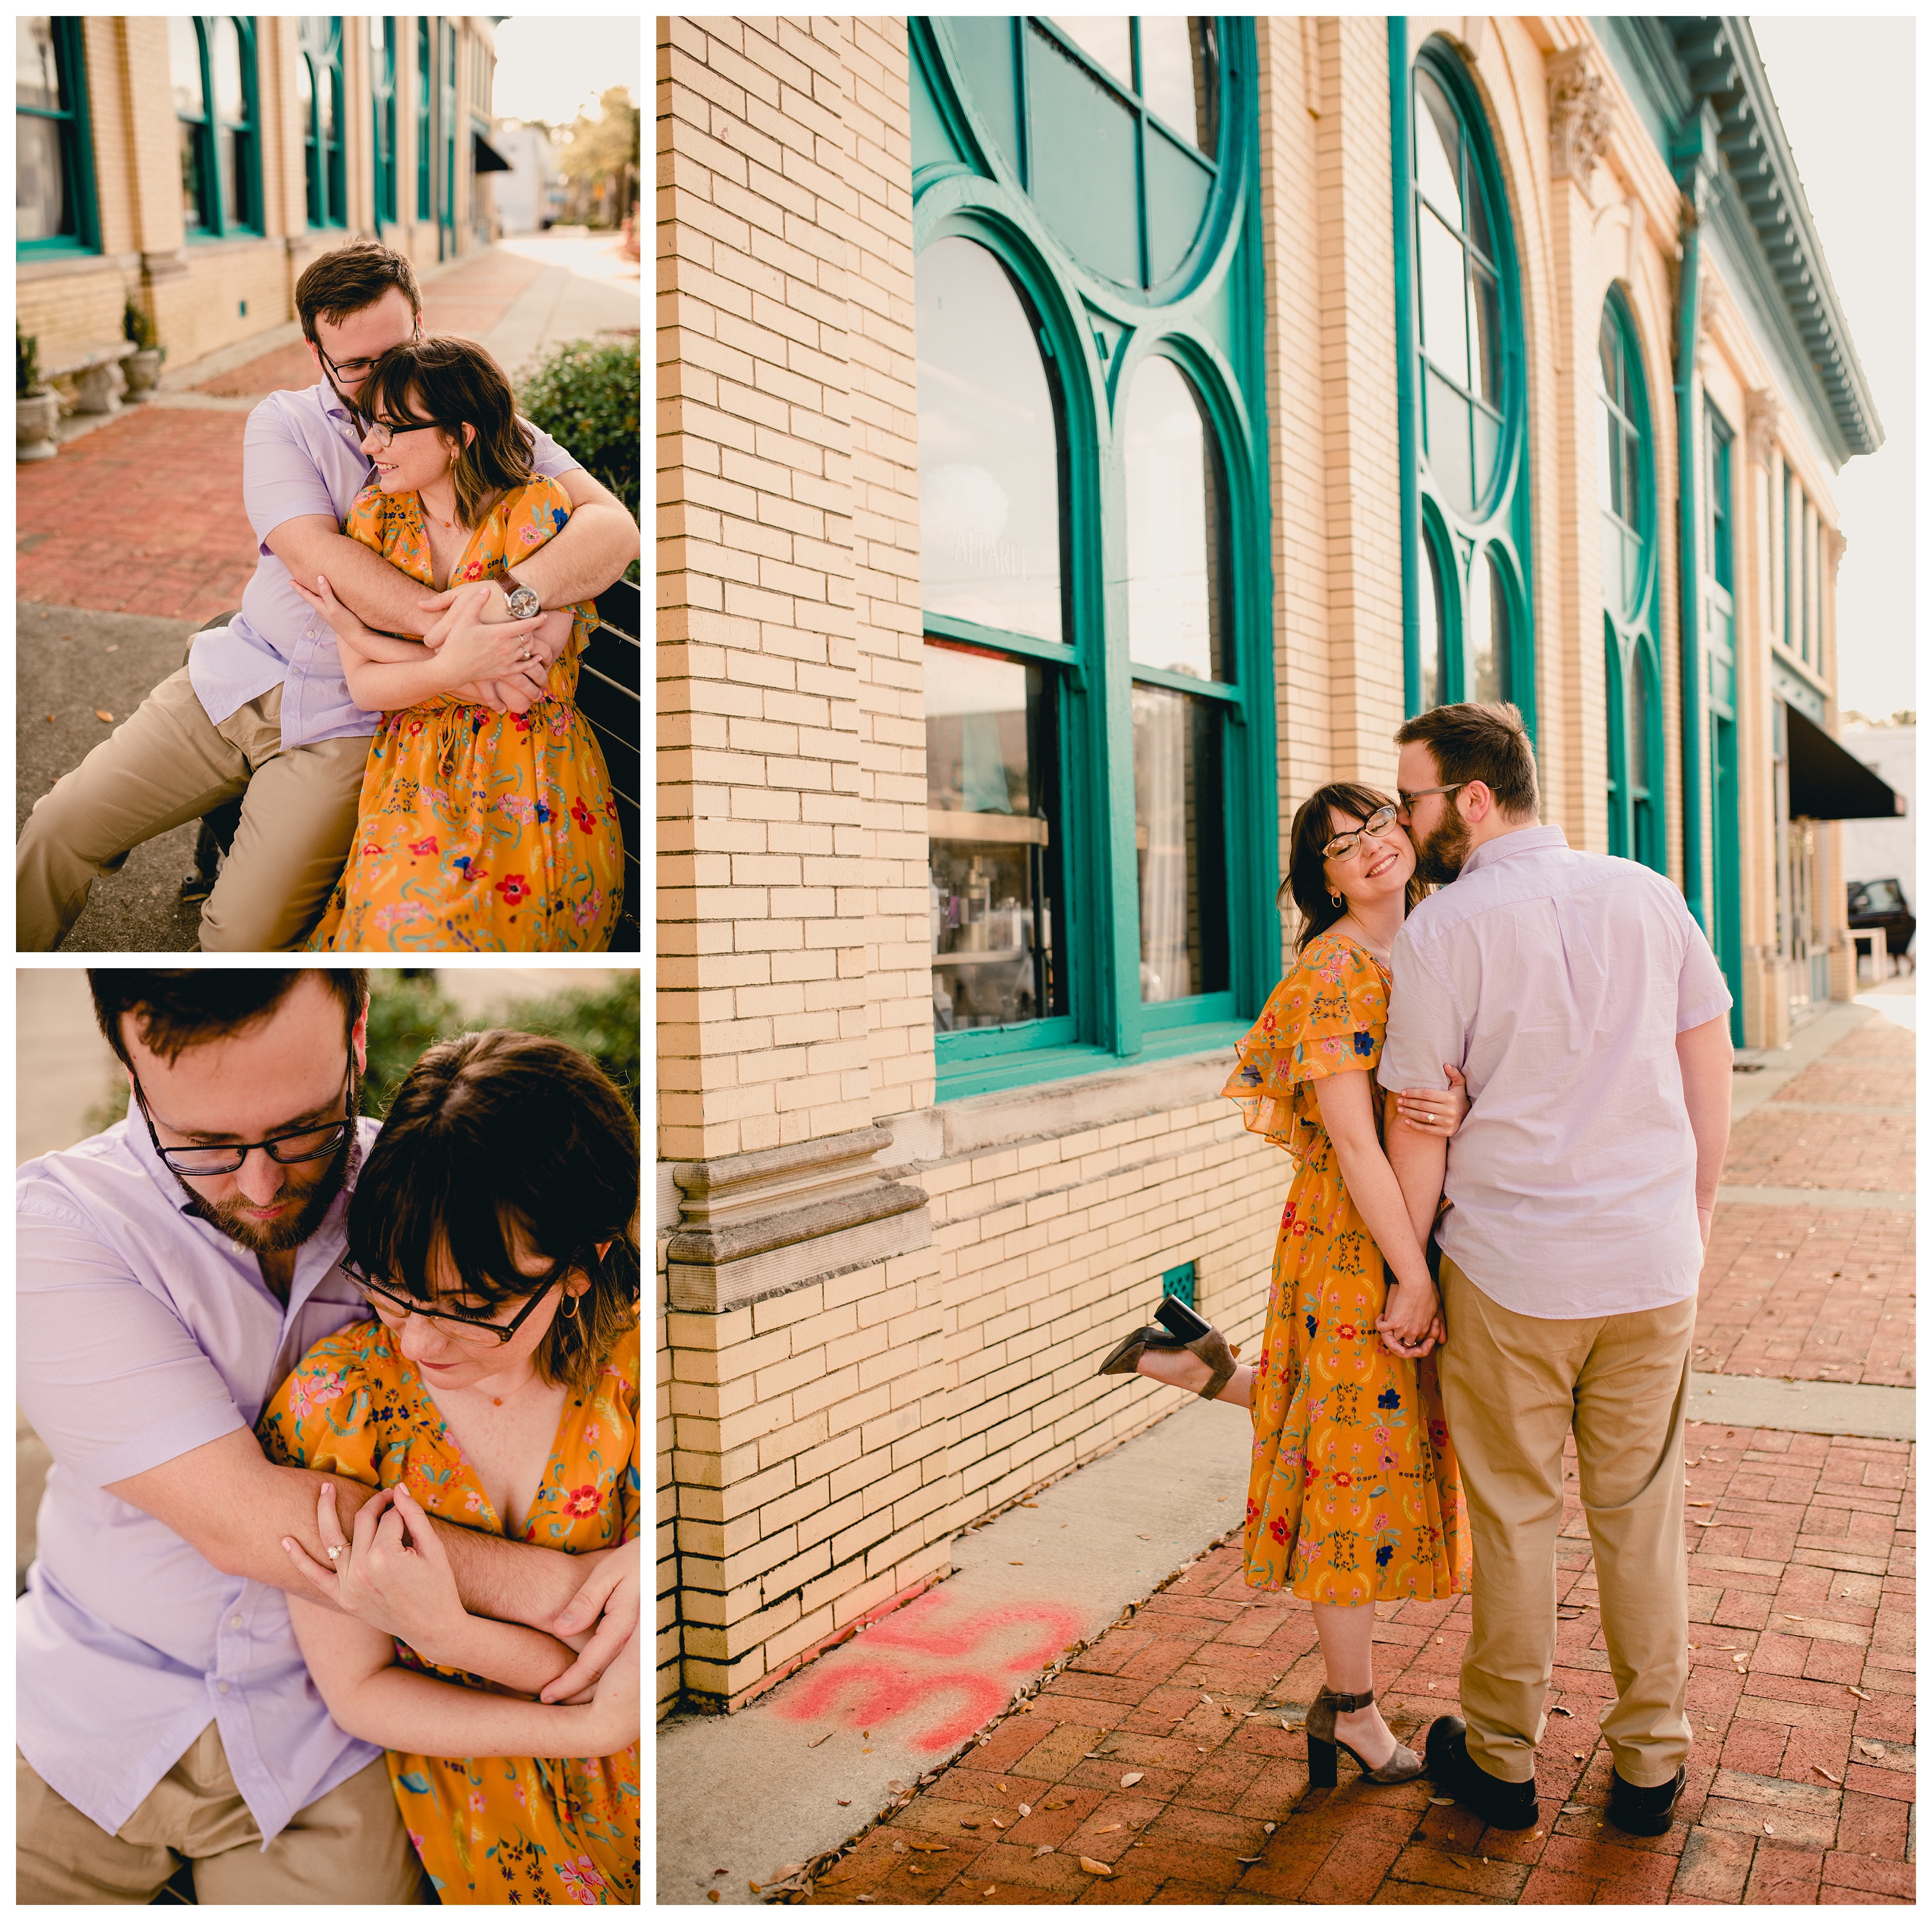 Lifestyle engagement photographer specializing in the relationship between couples. Shelly Williams Photography